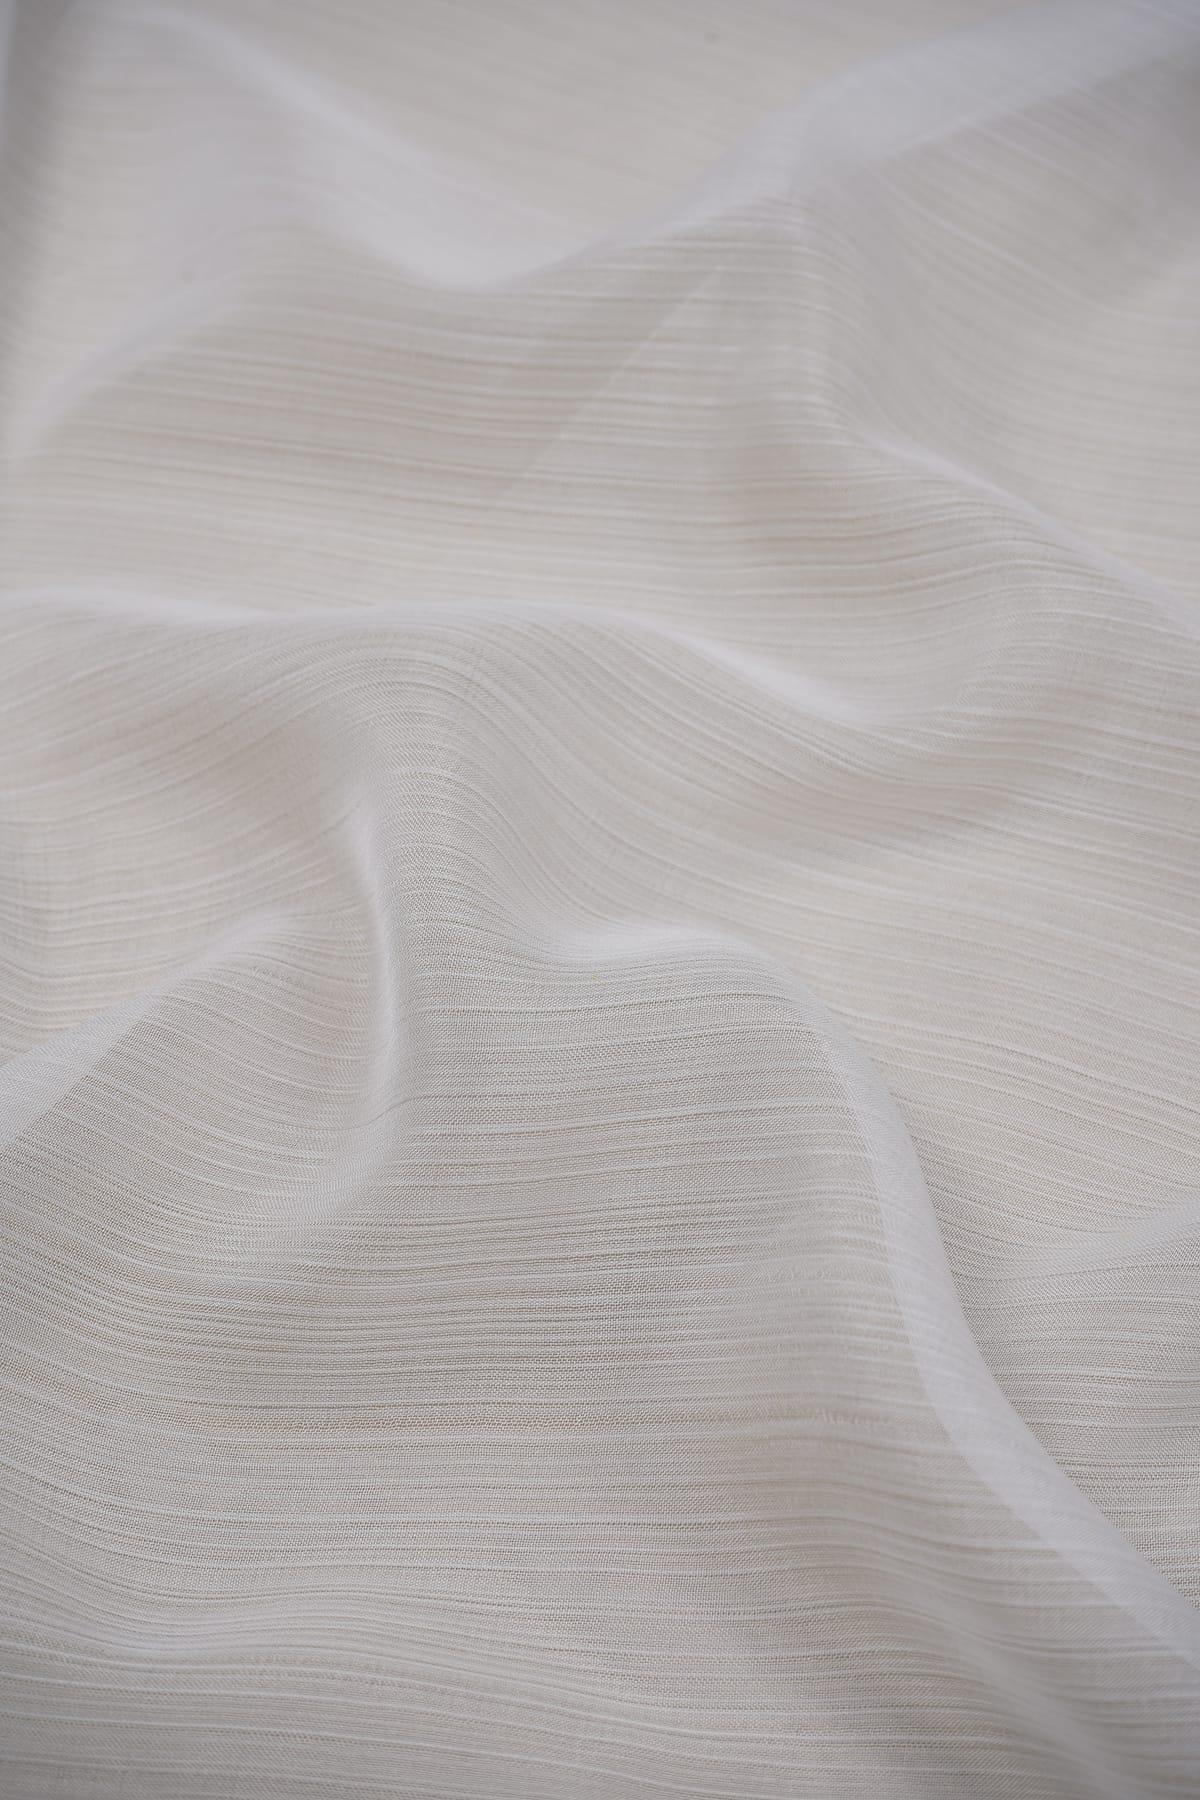 Plain White Organza Lining Viscose Base 55 GLM - saraaha.com - Accessories, Crisp, Curtains, Dupattas, Dyeable White, evening wear, Festive Wear, formal wear, Gowns, home decor, Lehengas, Light Weight, Lining, Loose Blouse, Lustrous, Organza, rayon, RFD, Royal, Sarees, scarves, Sheen, Sheer fabric, Silk, Skirts, Thin Fabric, Trimmings, Viscose, Western and Traditional Dresses, Women Wear